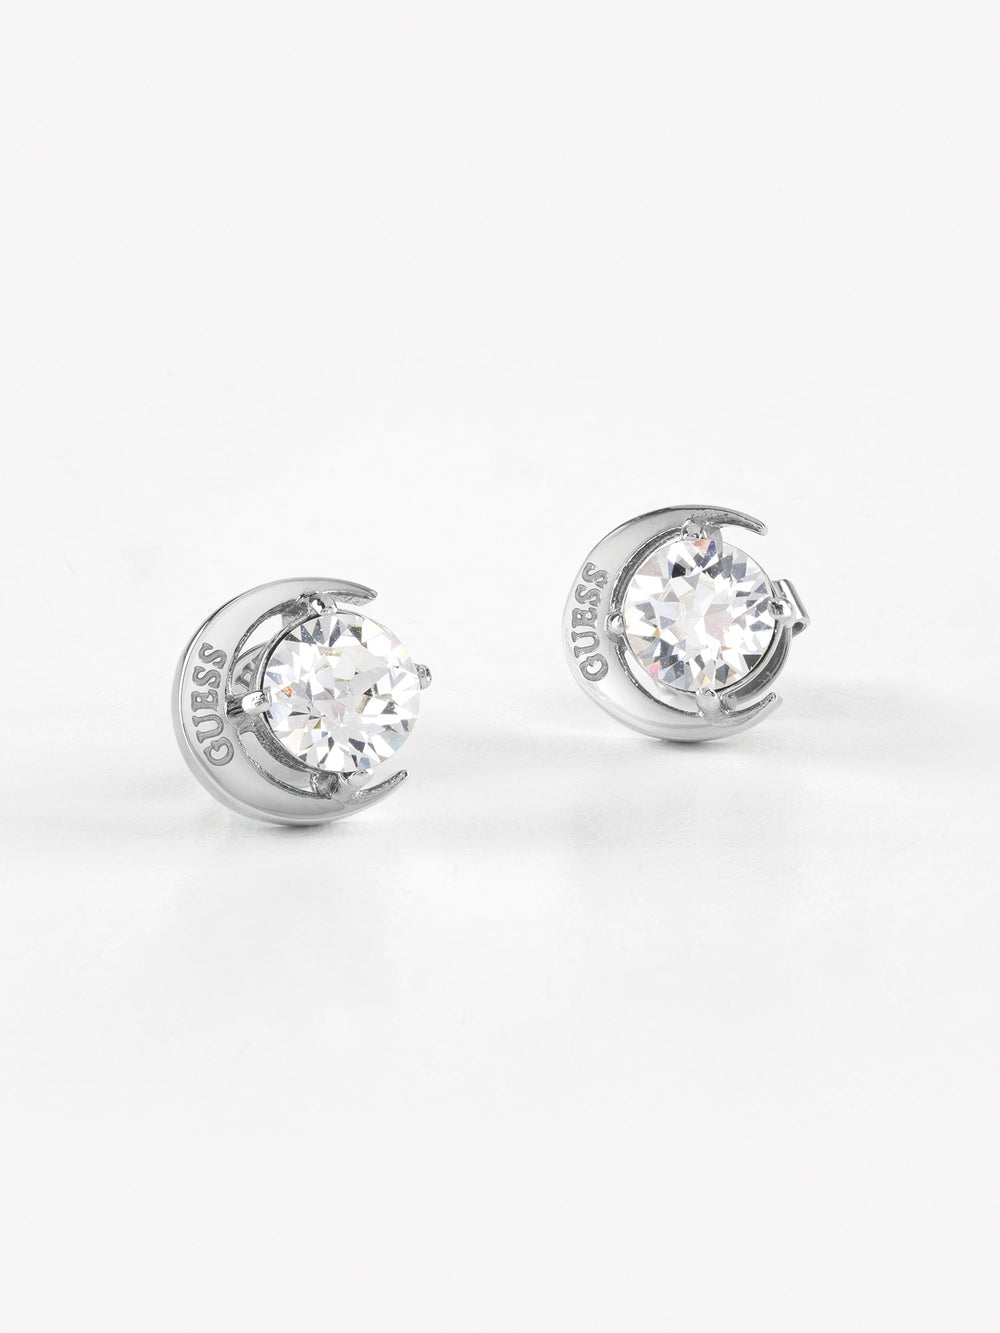 STUD EARRINGS - MOON PHASES - Guess